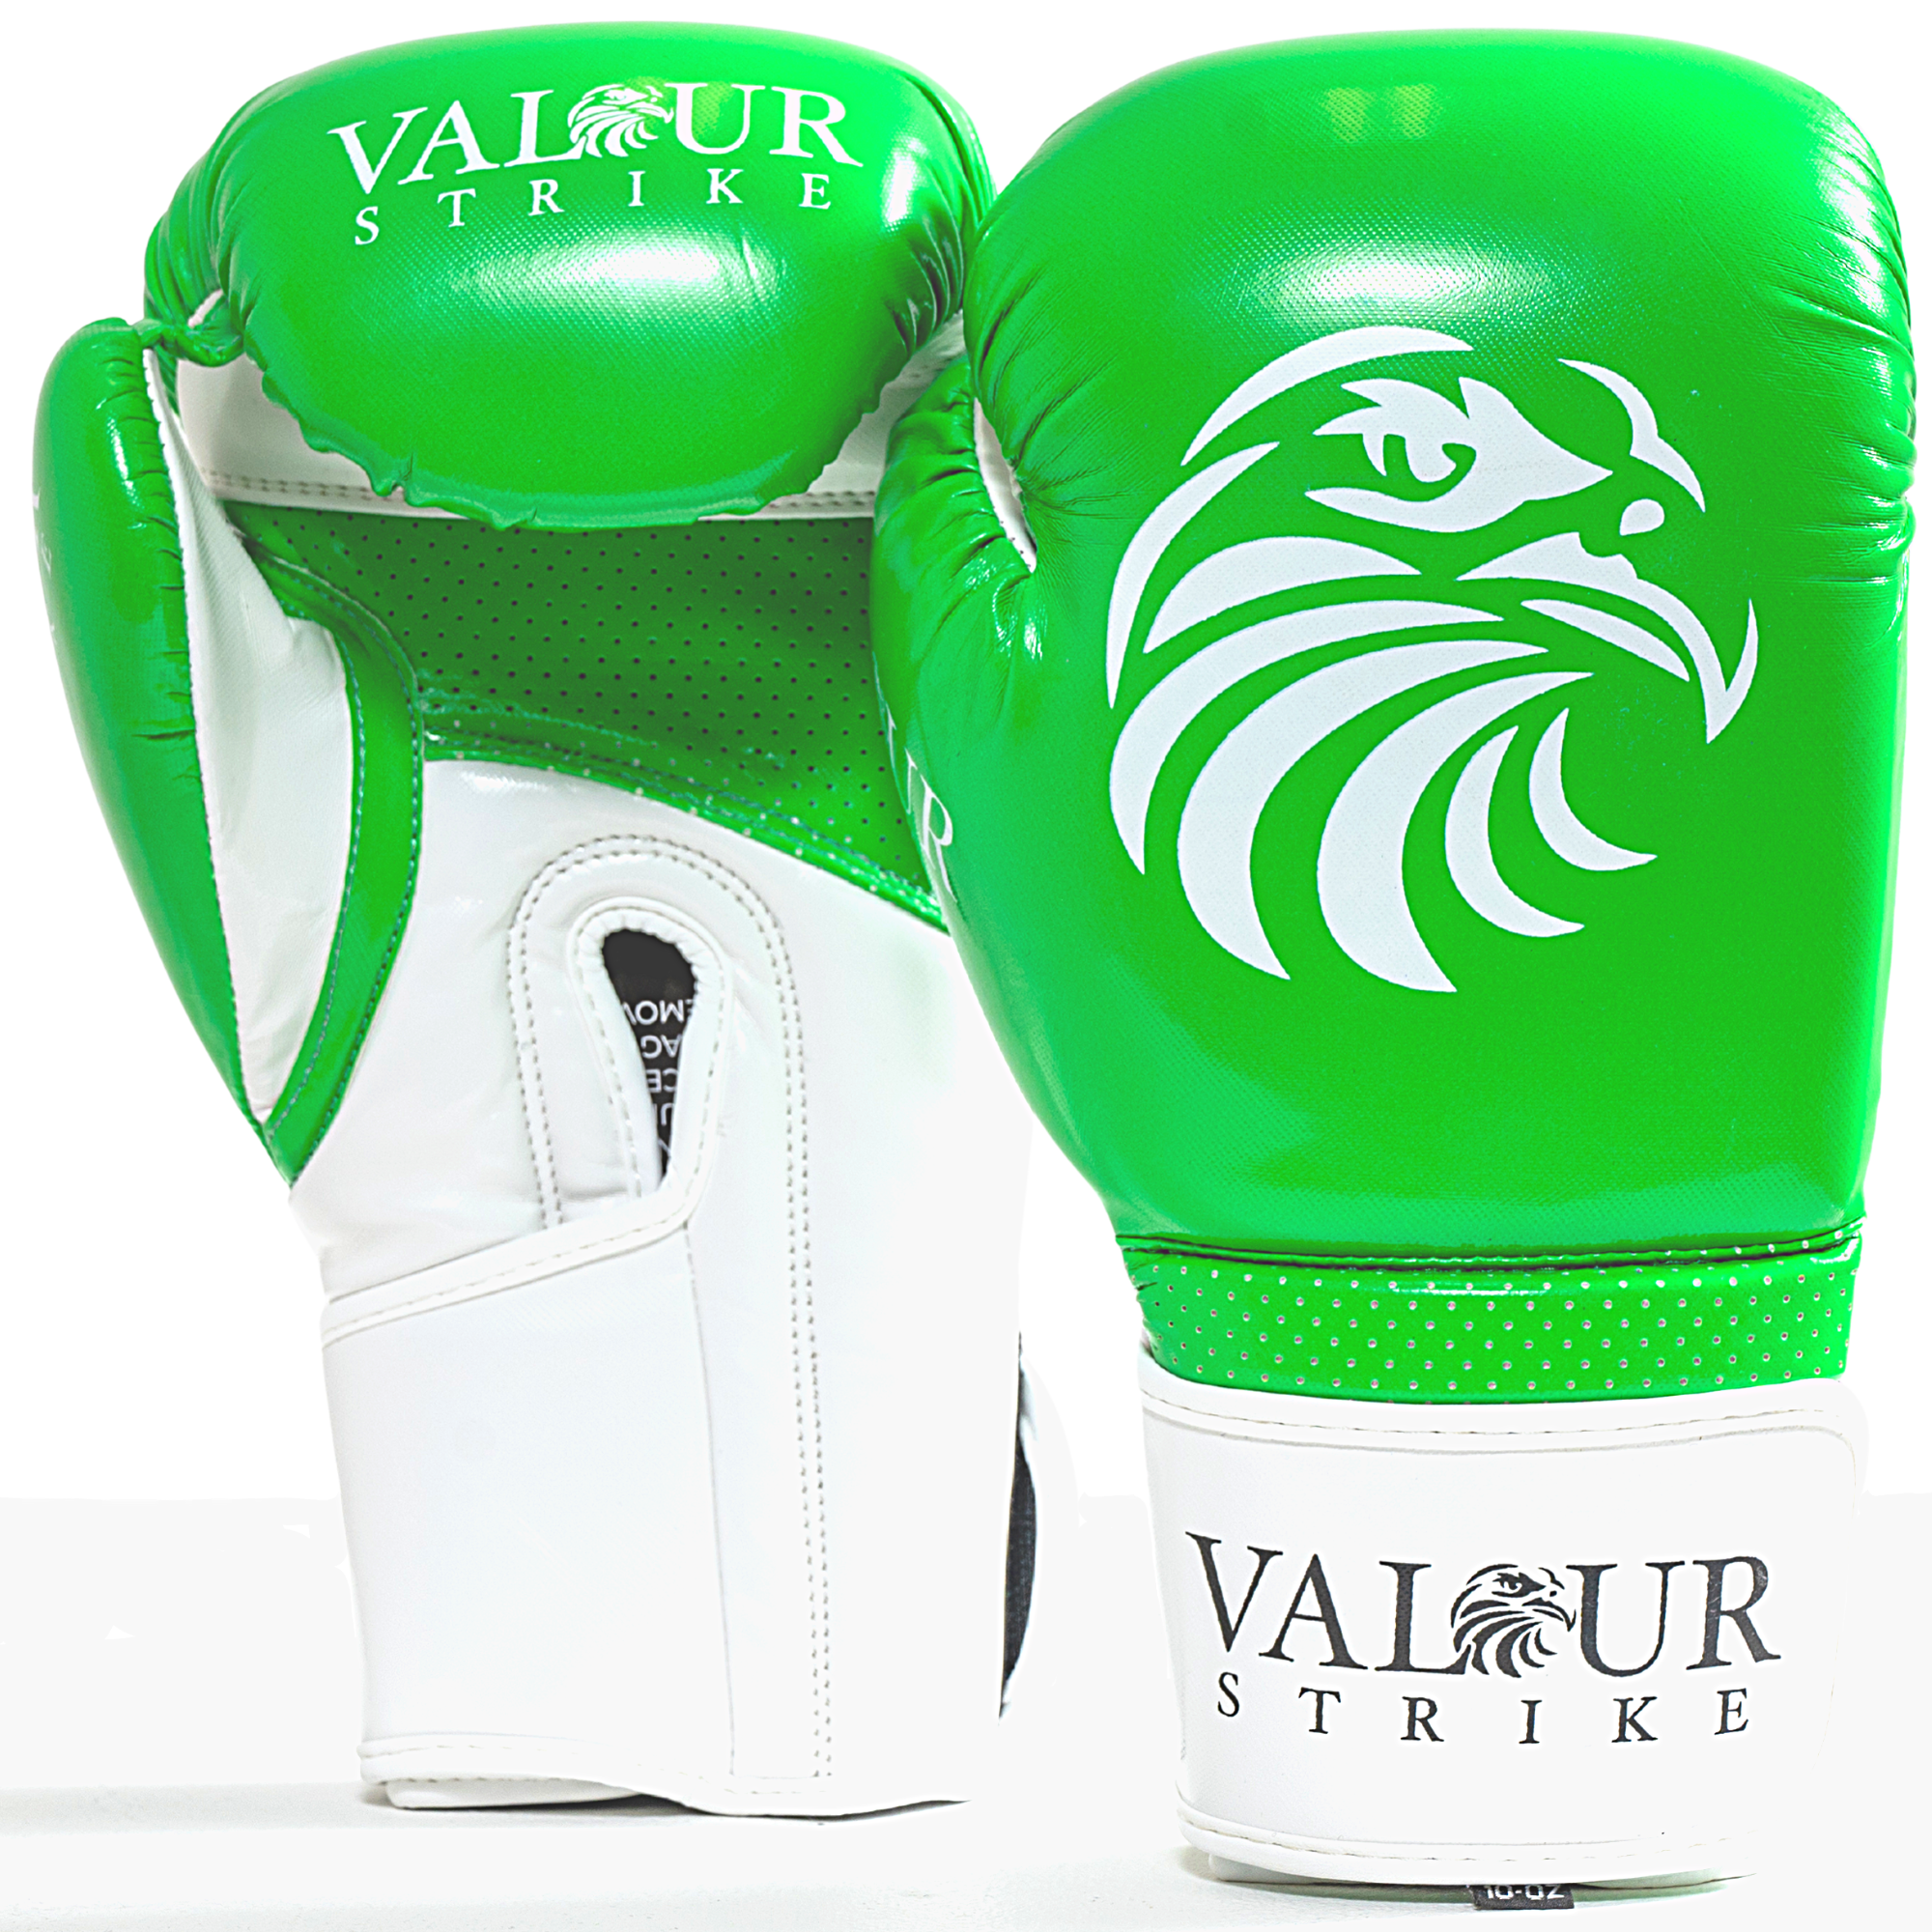 Green boxing gloves by valour strike